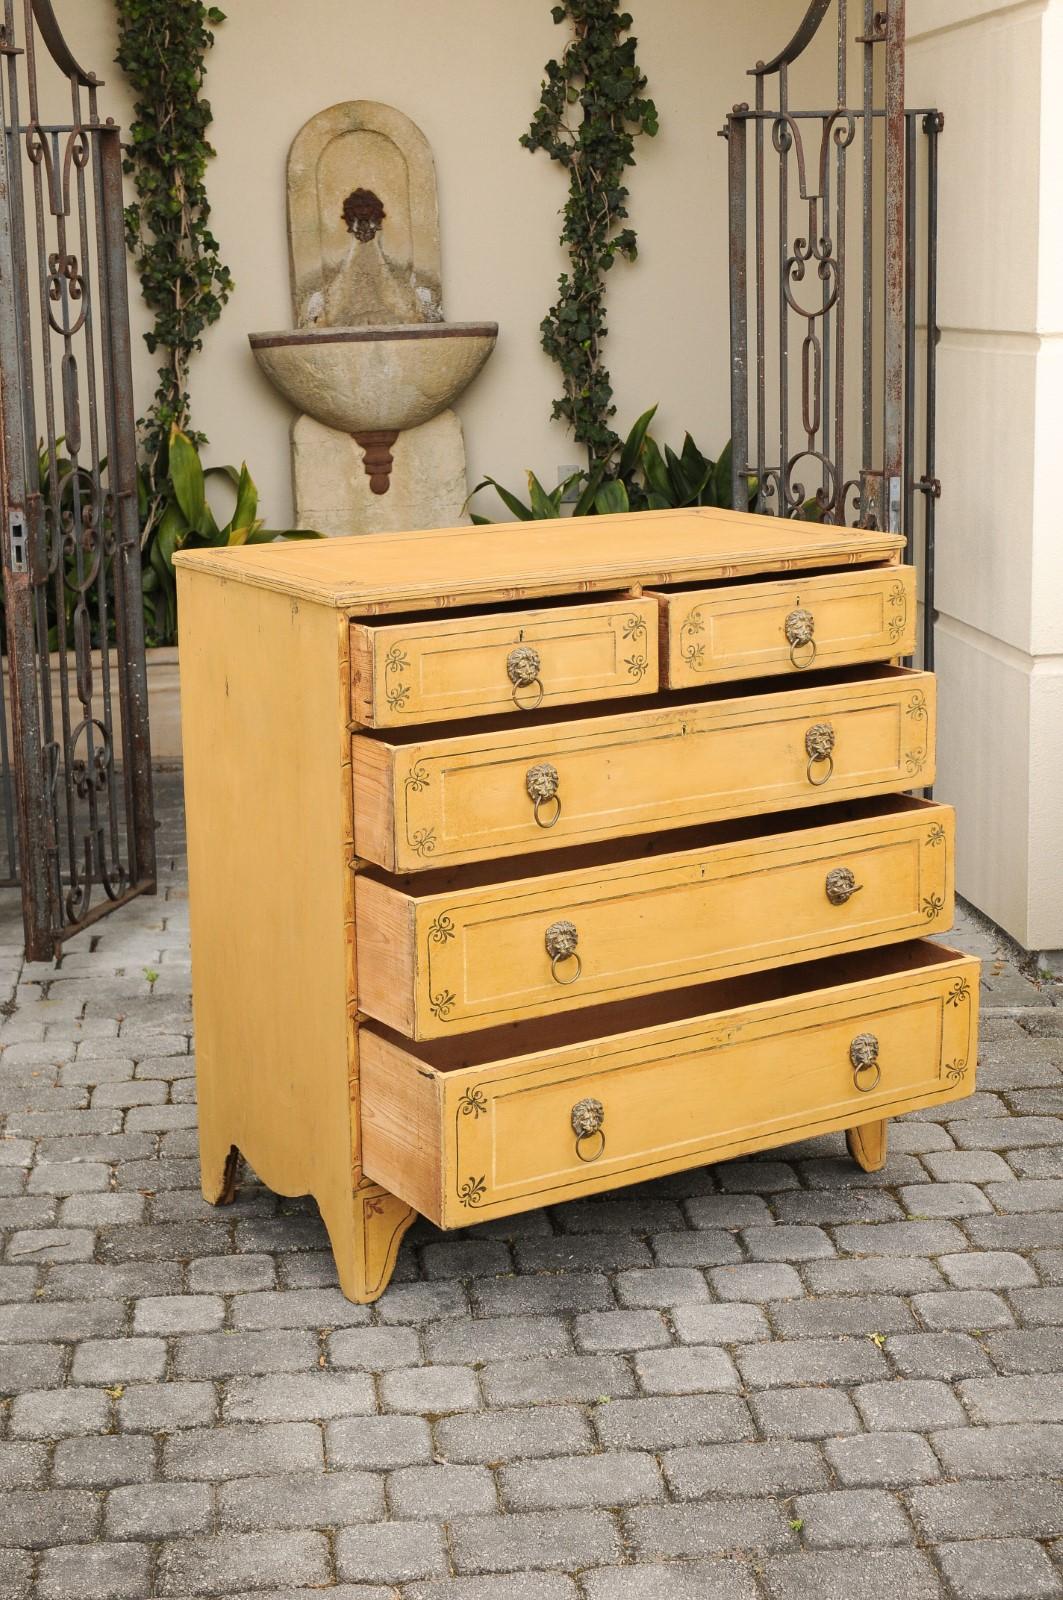 19th Century English Regency 1830s Five-Drawer Goldenrod Painted Commode with Floral Accents